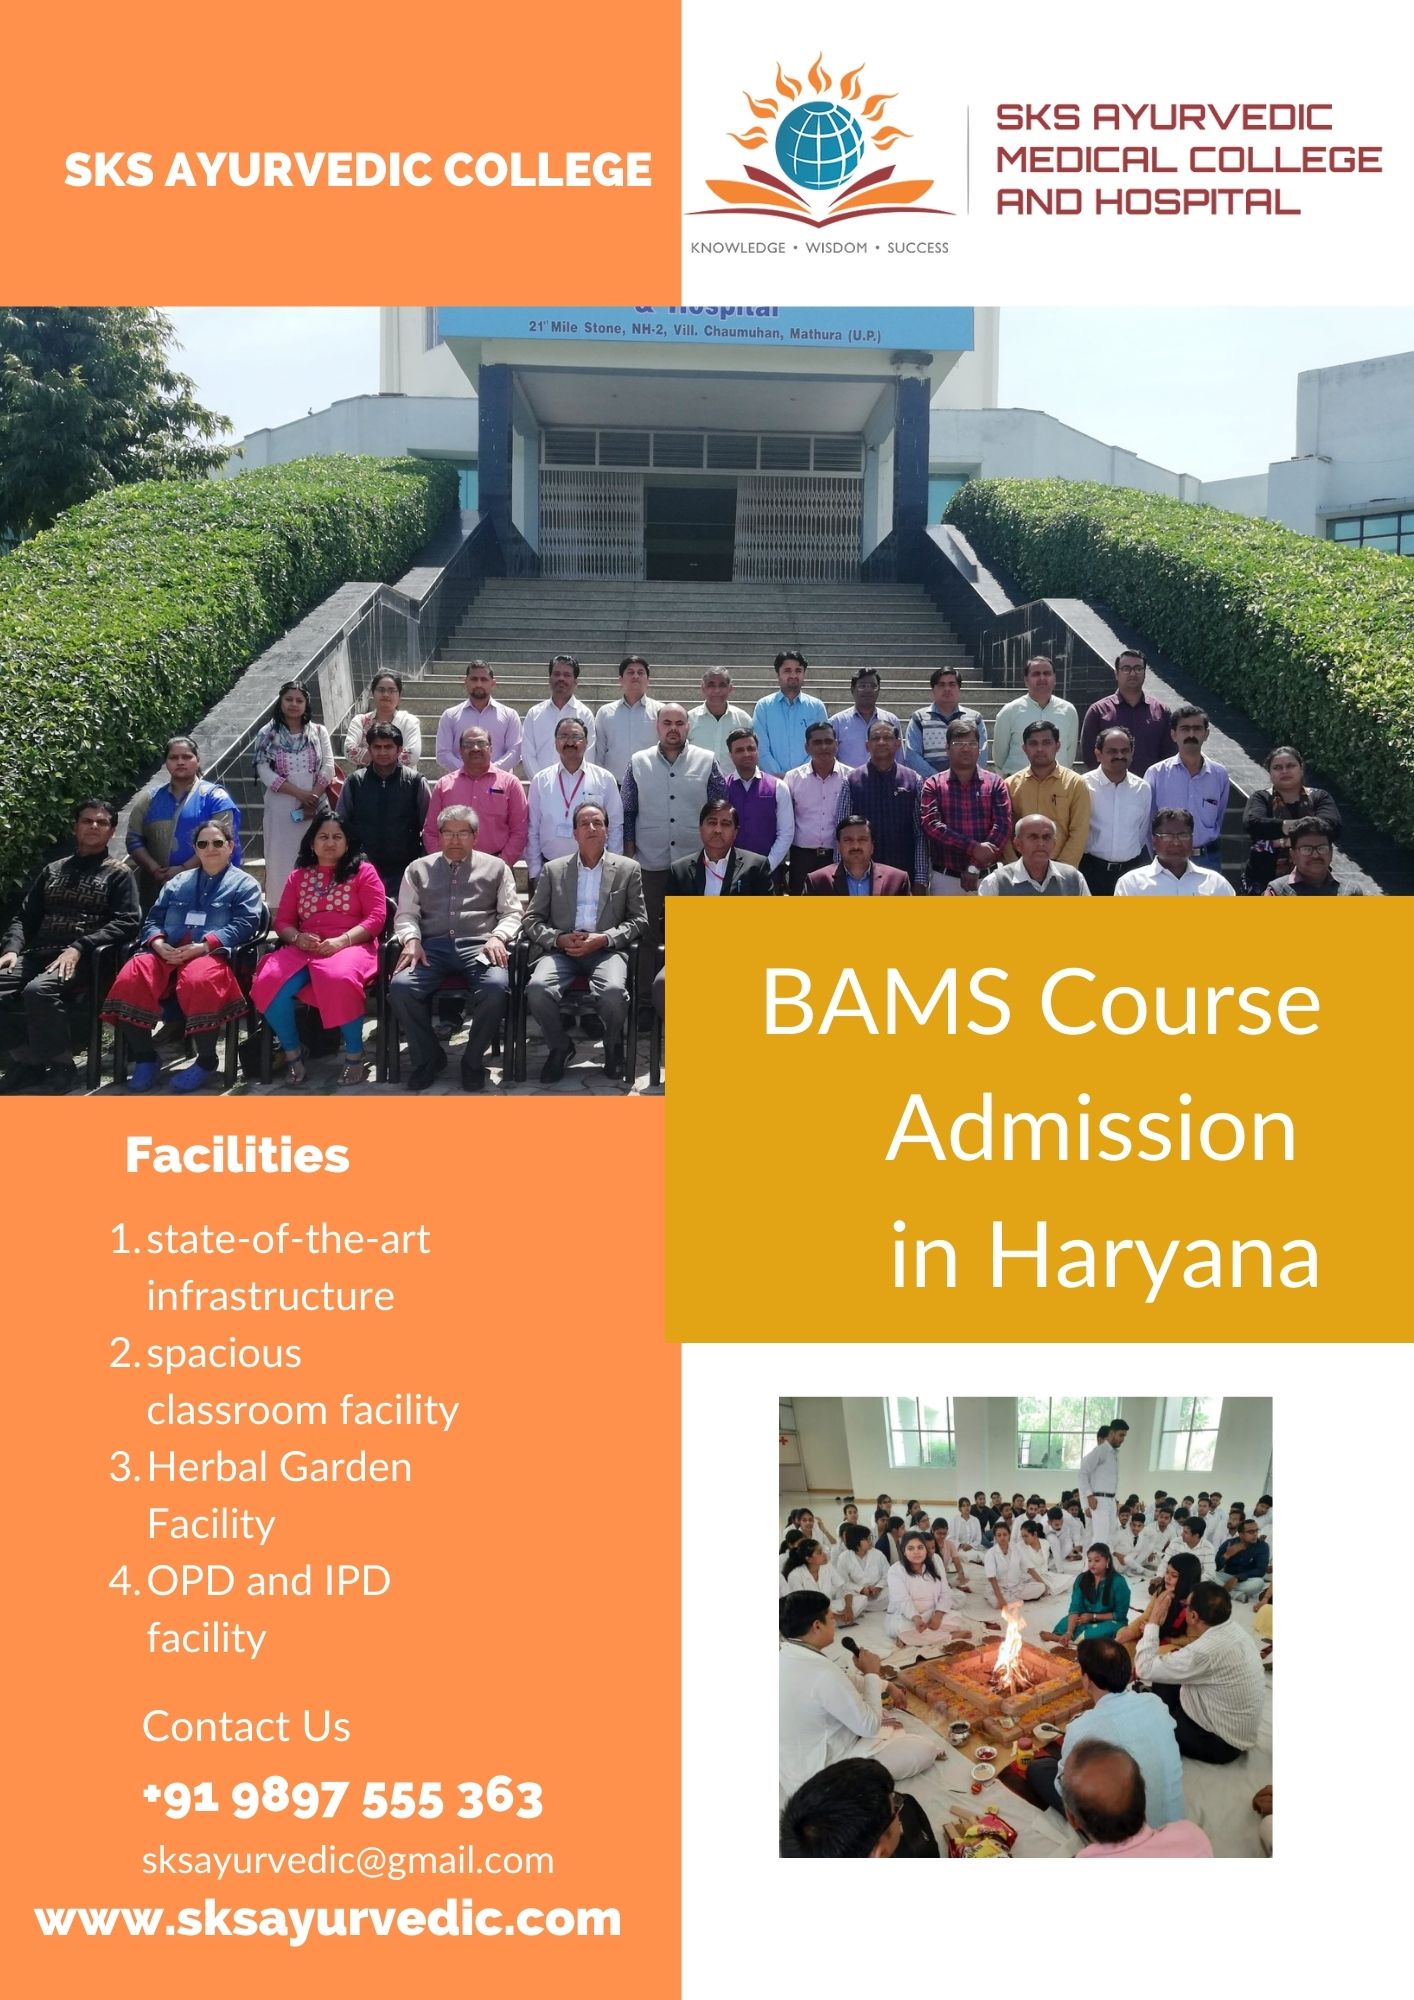 BAMS Course Admission in Haryana